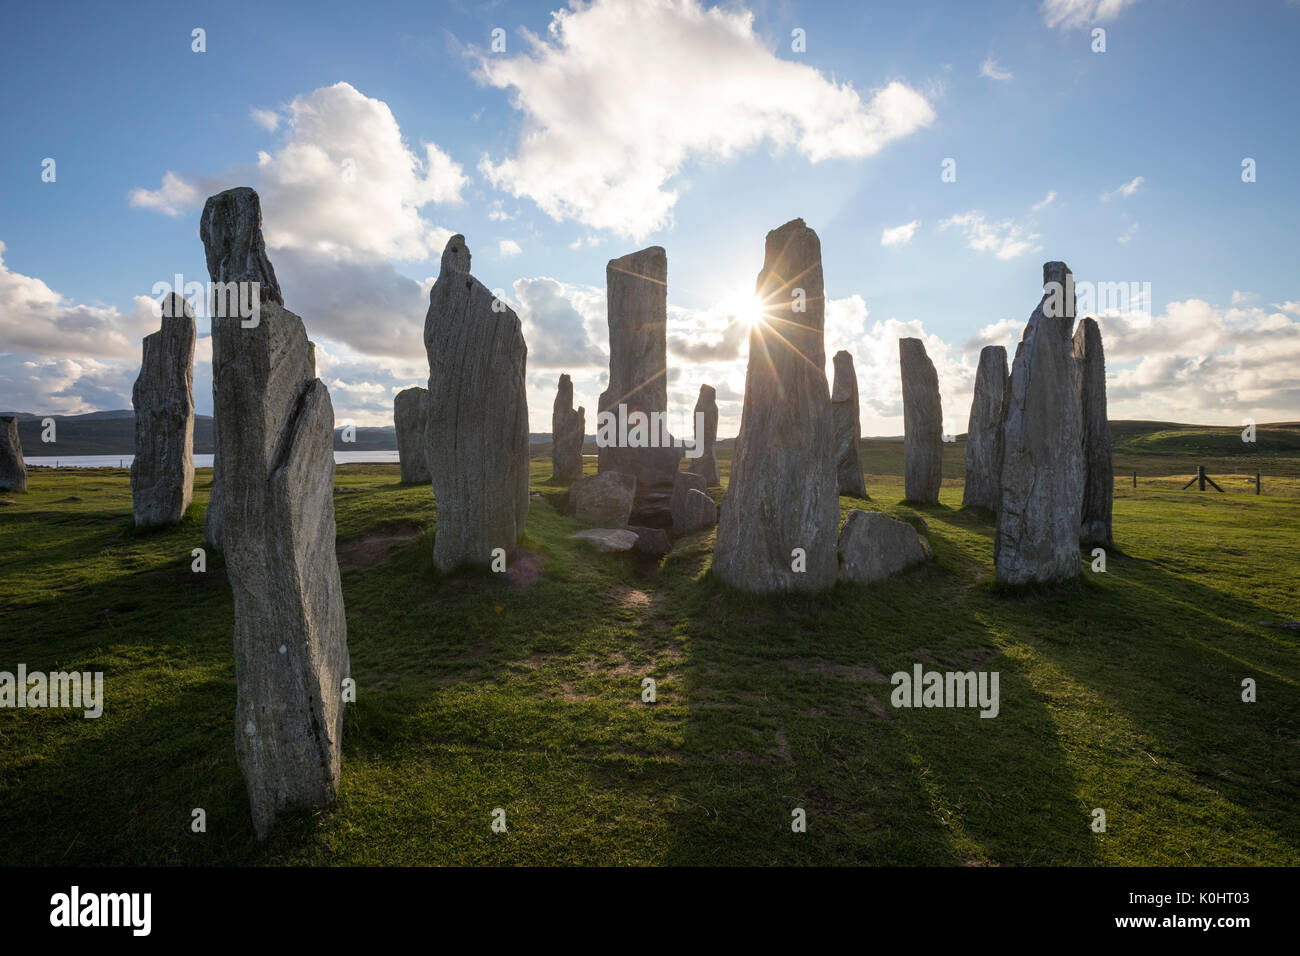 Chambered tomb, Callanish Standing Stones, standing stones placed in a cruciform pattern with a central stone circle, Callanish, Scotland, UK Stock Photo